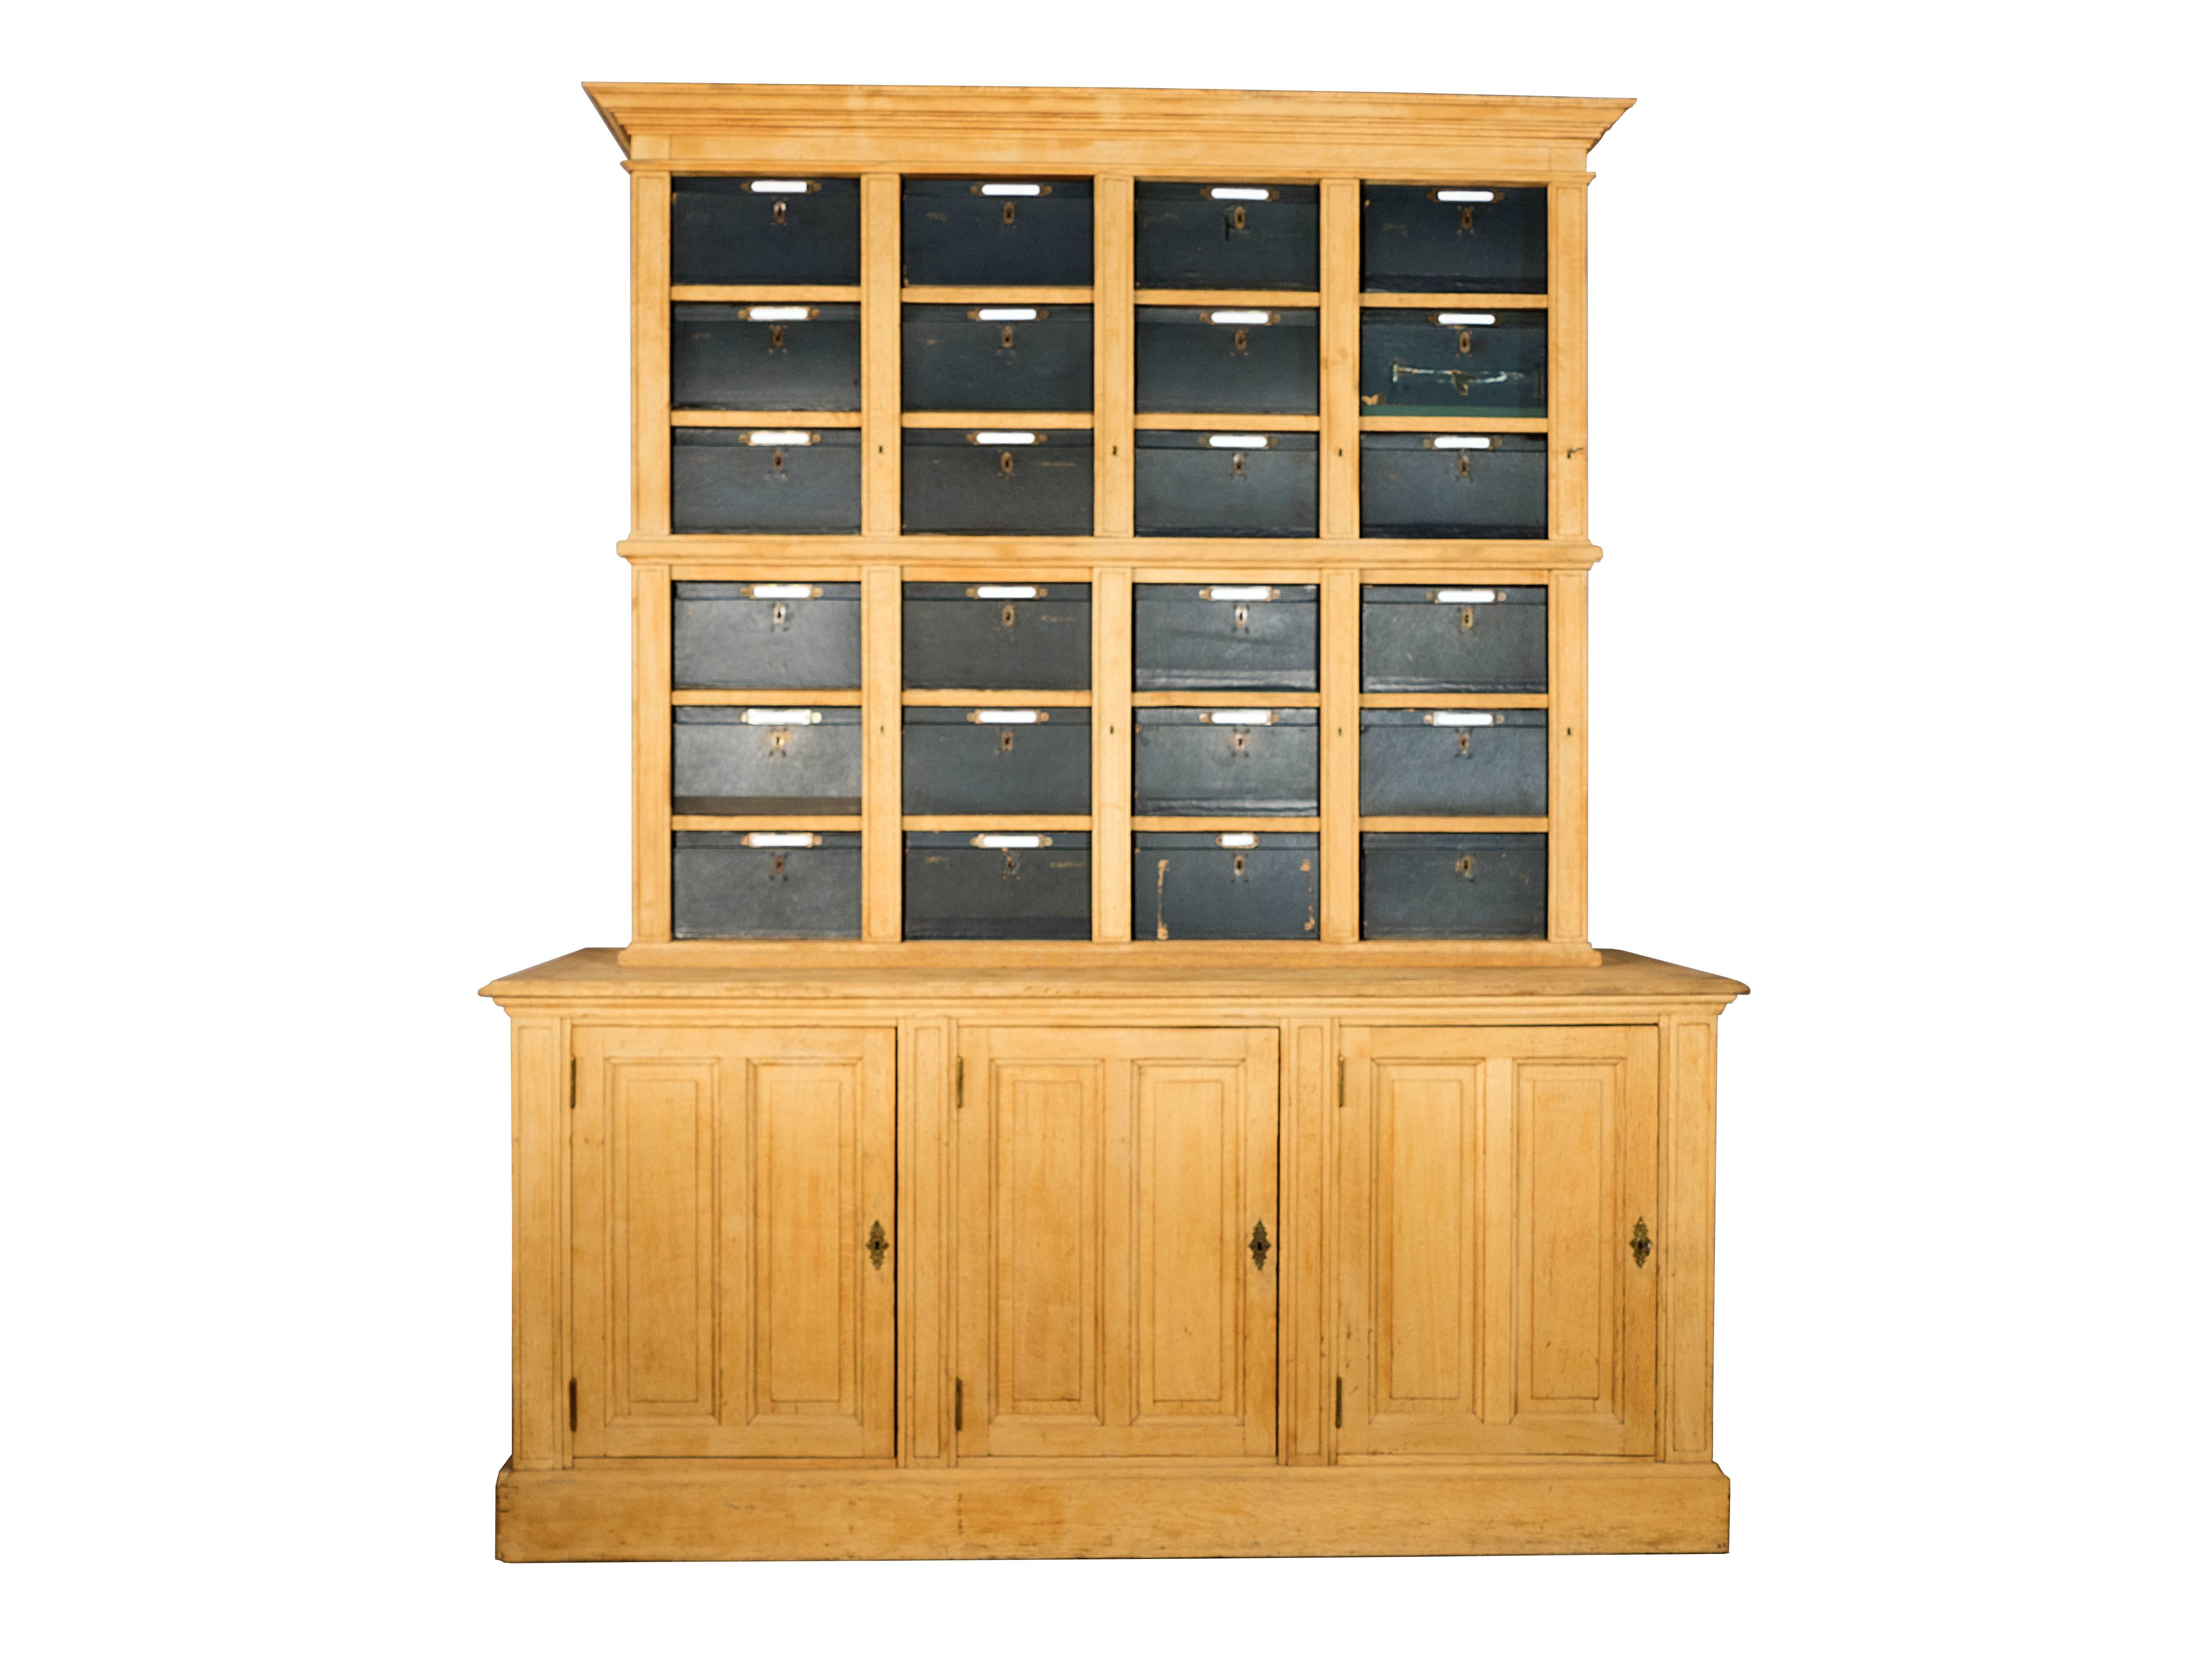 This beautiful and rare piece came from a Parisian lawyer office to hold the confidential files.
French oak cabinet with 24 removable cardboard drawers/boxes with brass latches (box size: W 14